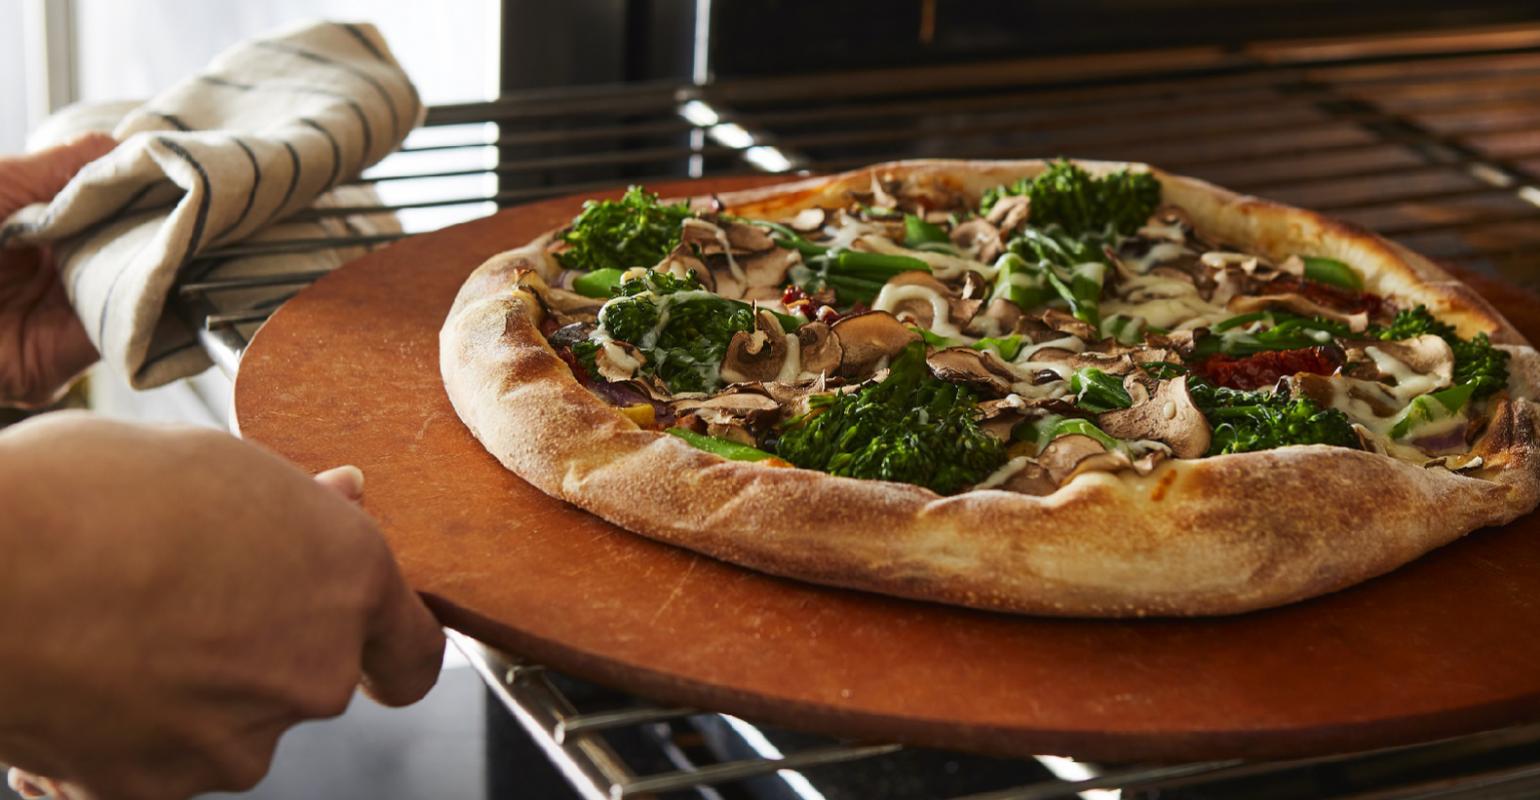 Build-Your-Own Pizza: Latest Hot Trend in Casual Dining